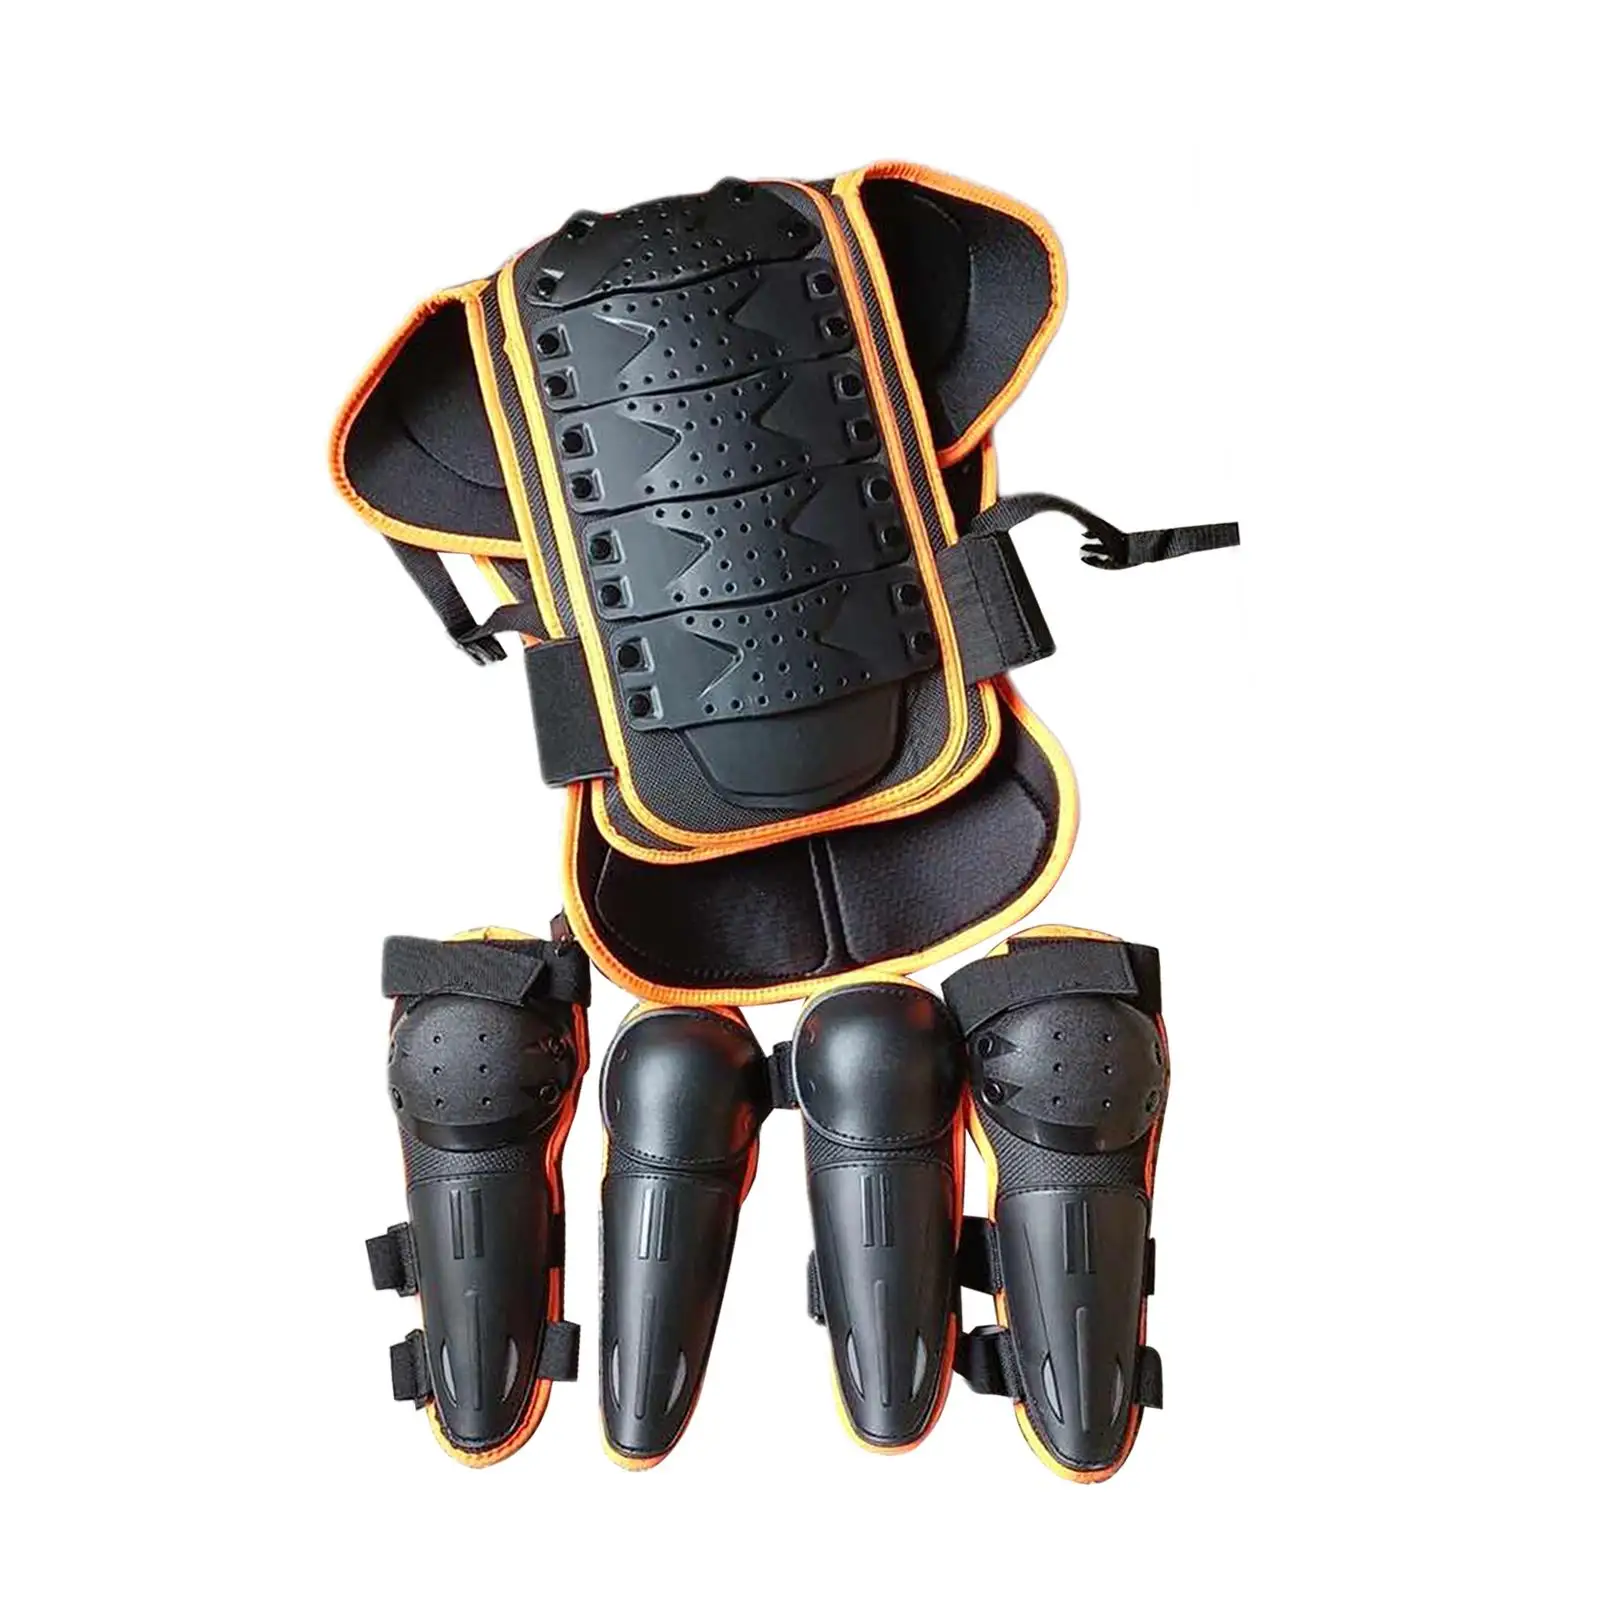 Chest Spine Back Protector Dirt Bike Gear Kids Motorcycle Full Body Armors Suit for Skateboard Children Skating Cycling Skiing